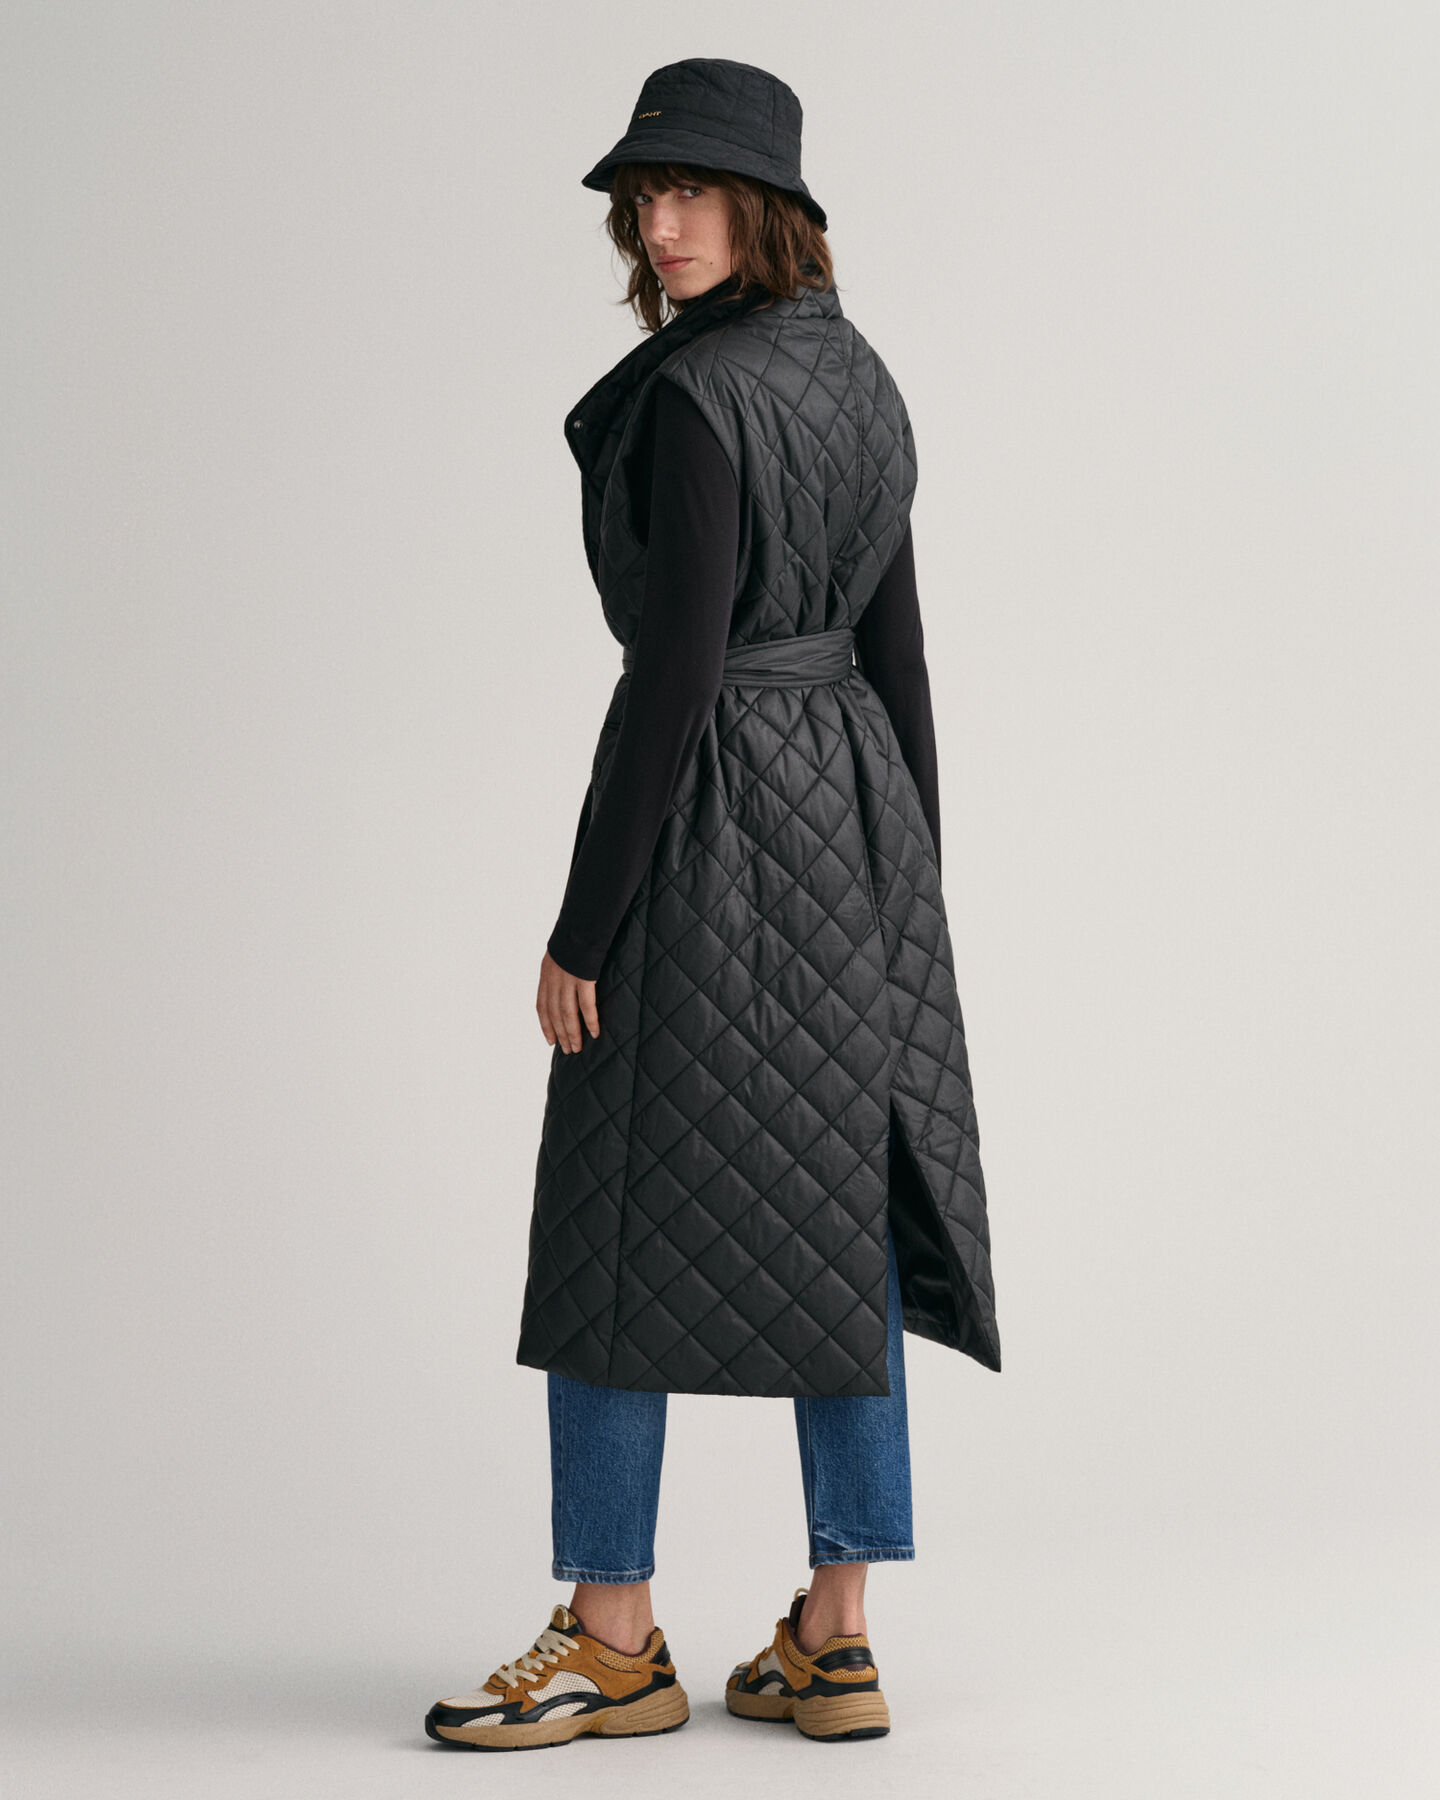 Esprit quilted coat with hood in black